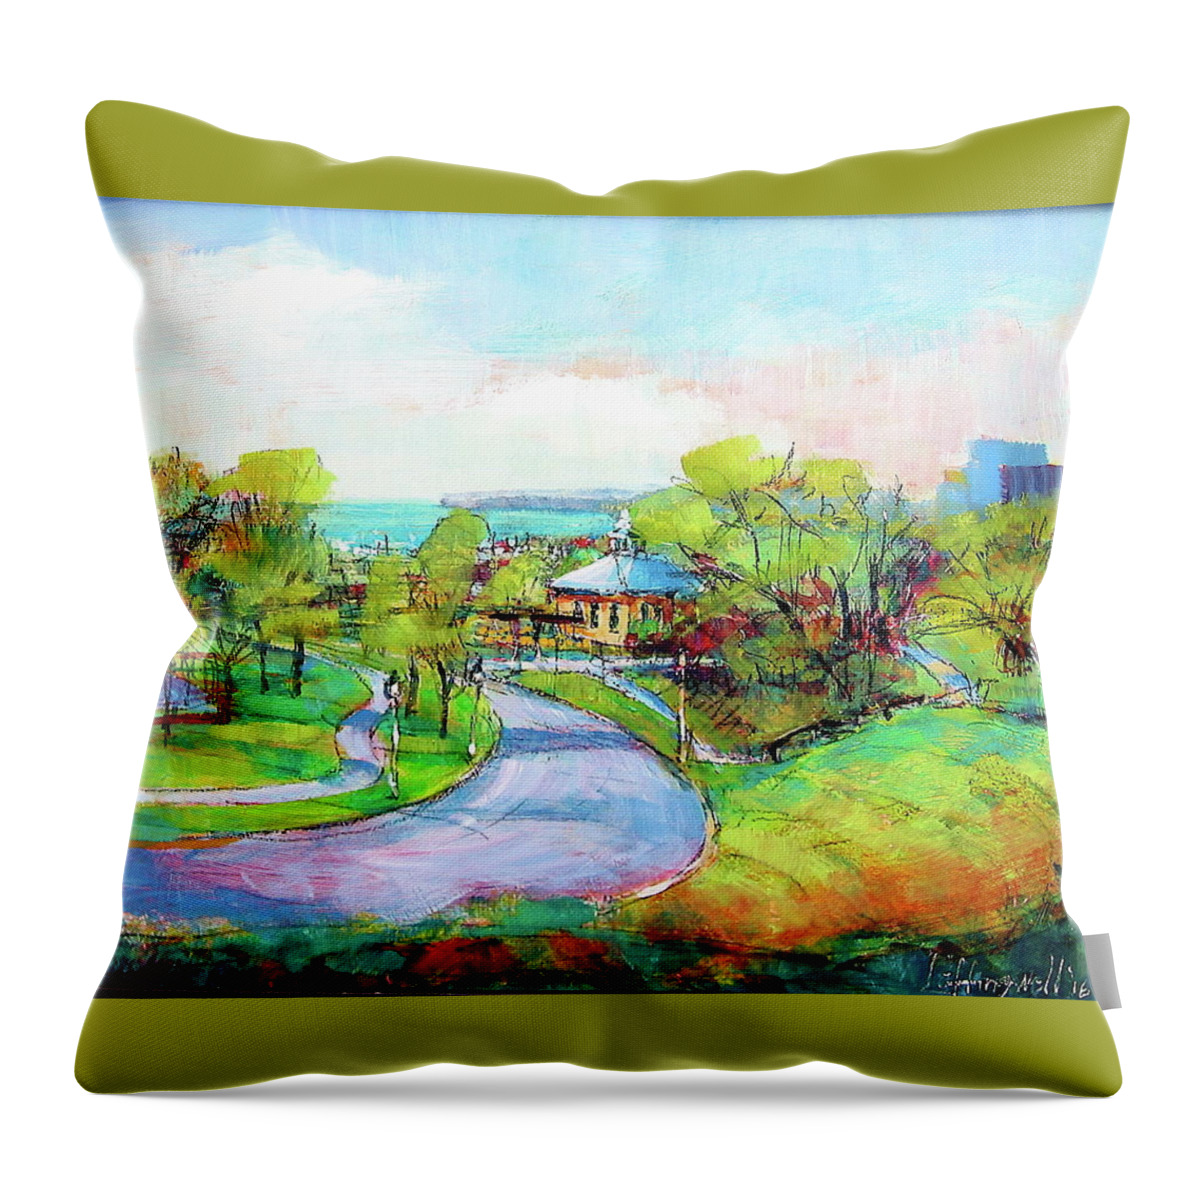 Plein Air Throw Pillow featuring the painting Layfayette Hill by Les Leffingwell